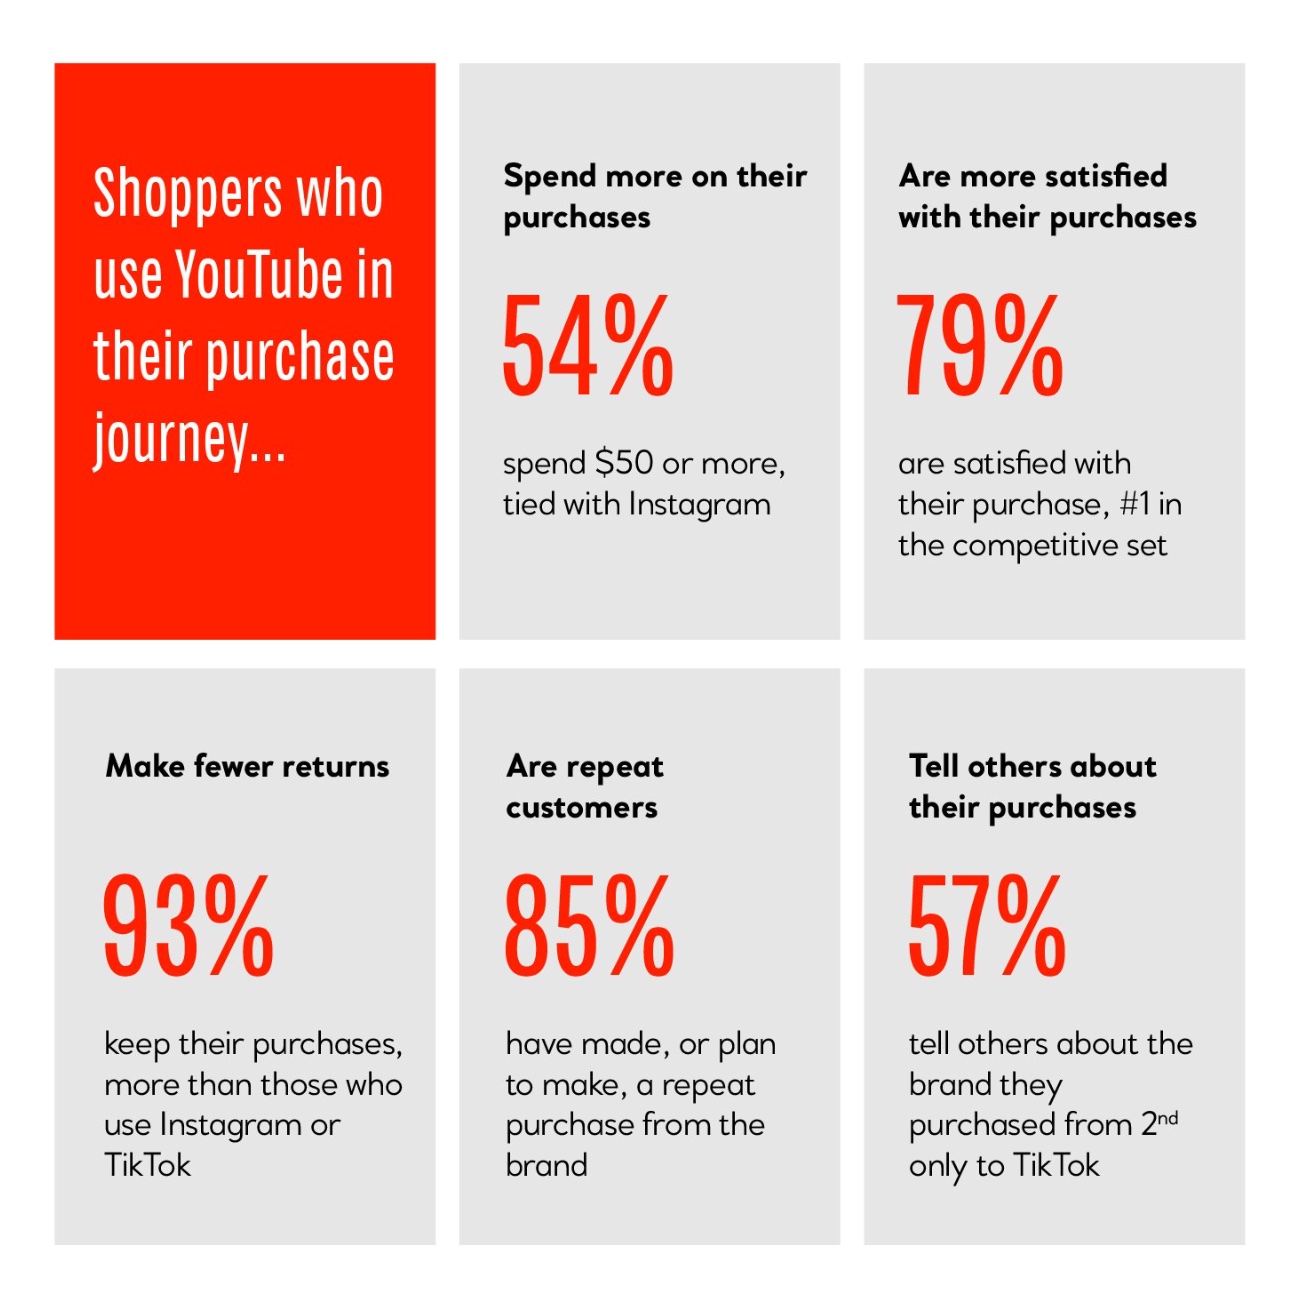 A Talk Shoppe survey on YouTube users - results